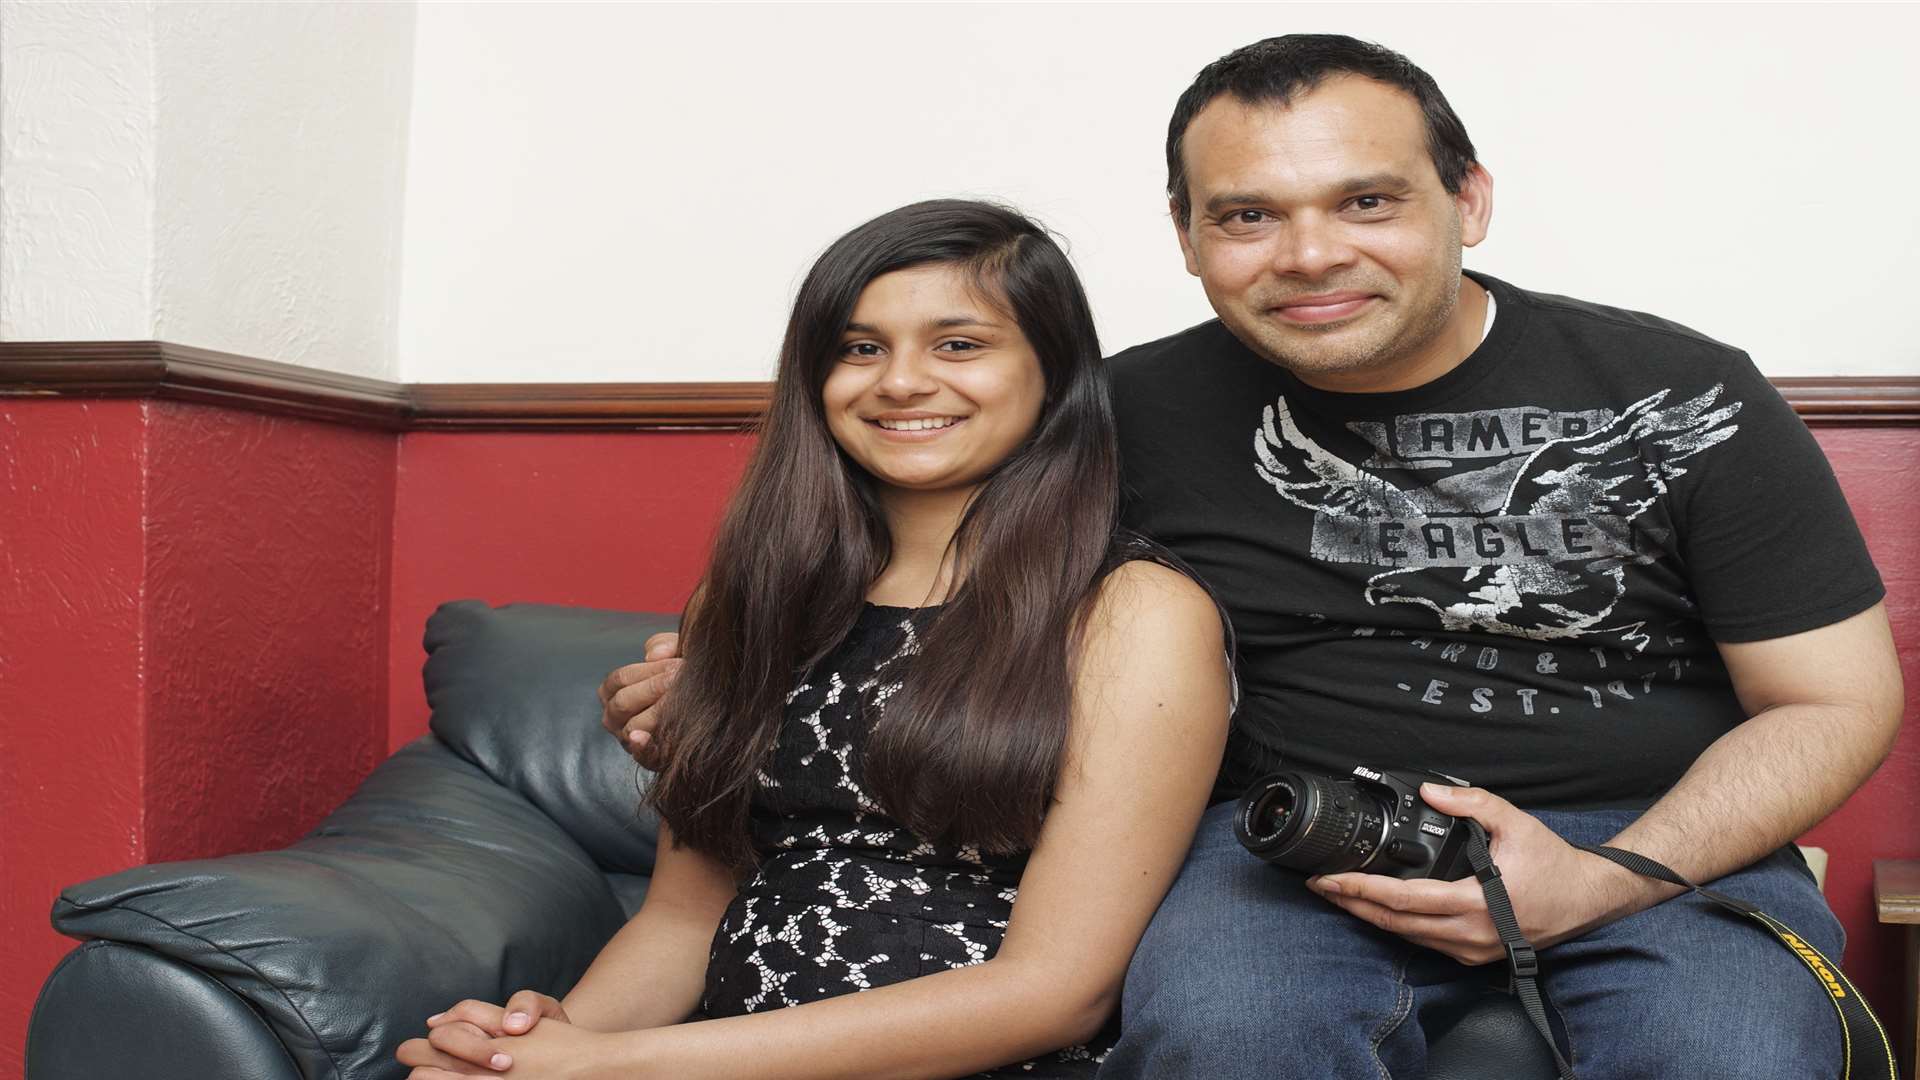 Munish Bansal has taken a picture of his daughter Suman, every day since she was born